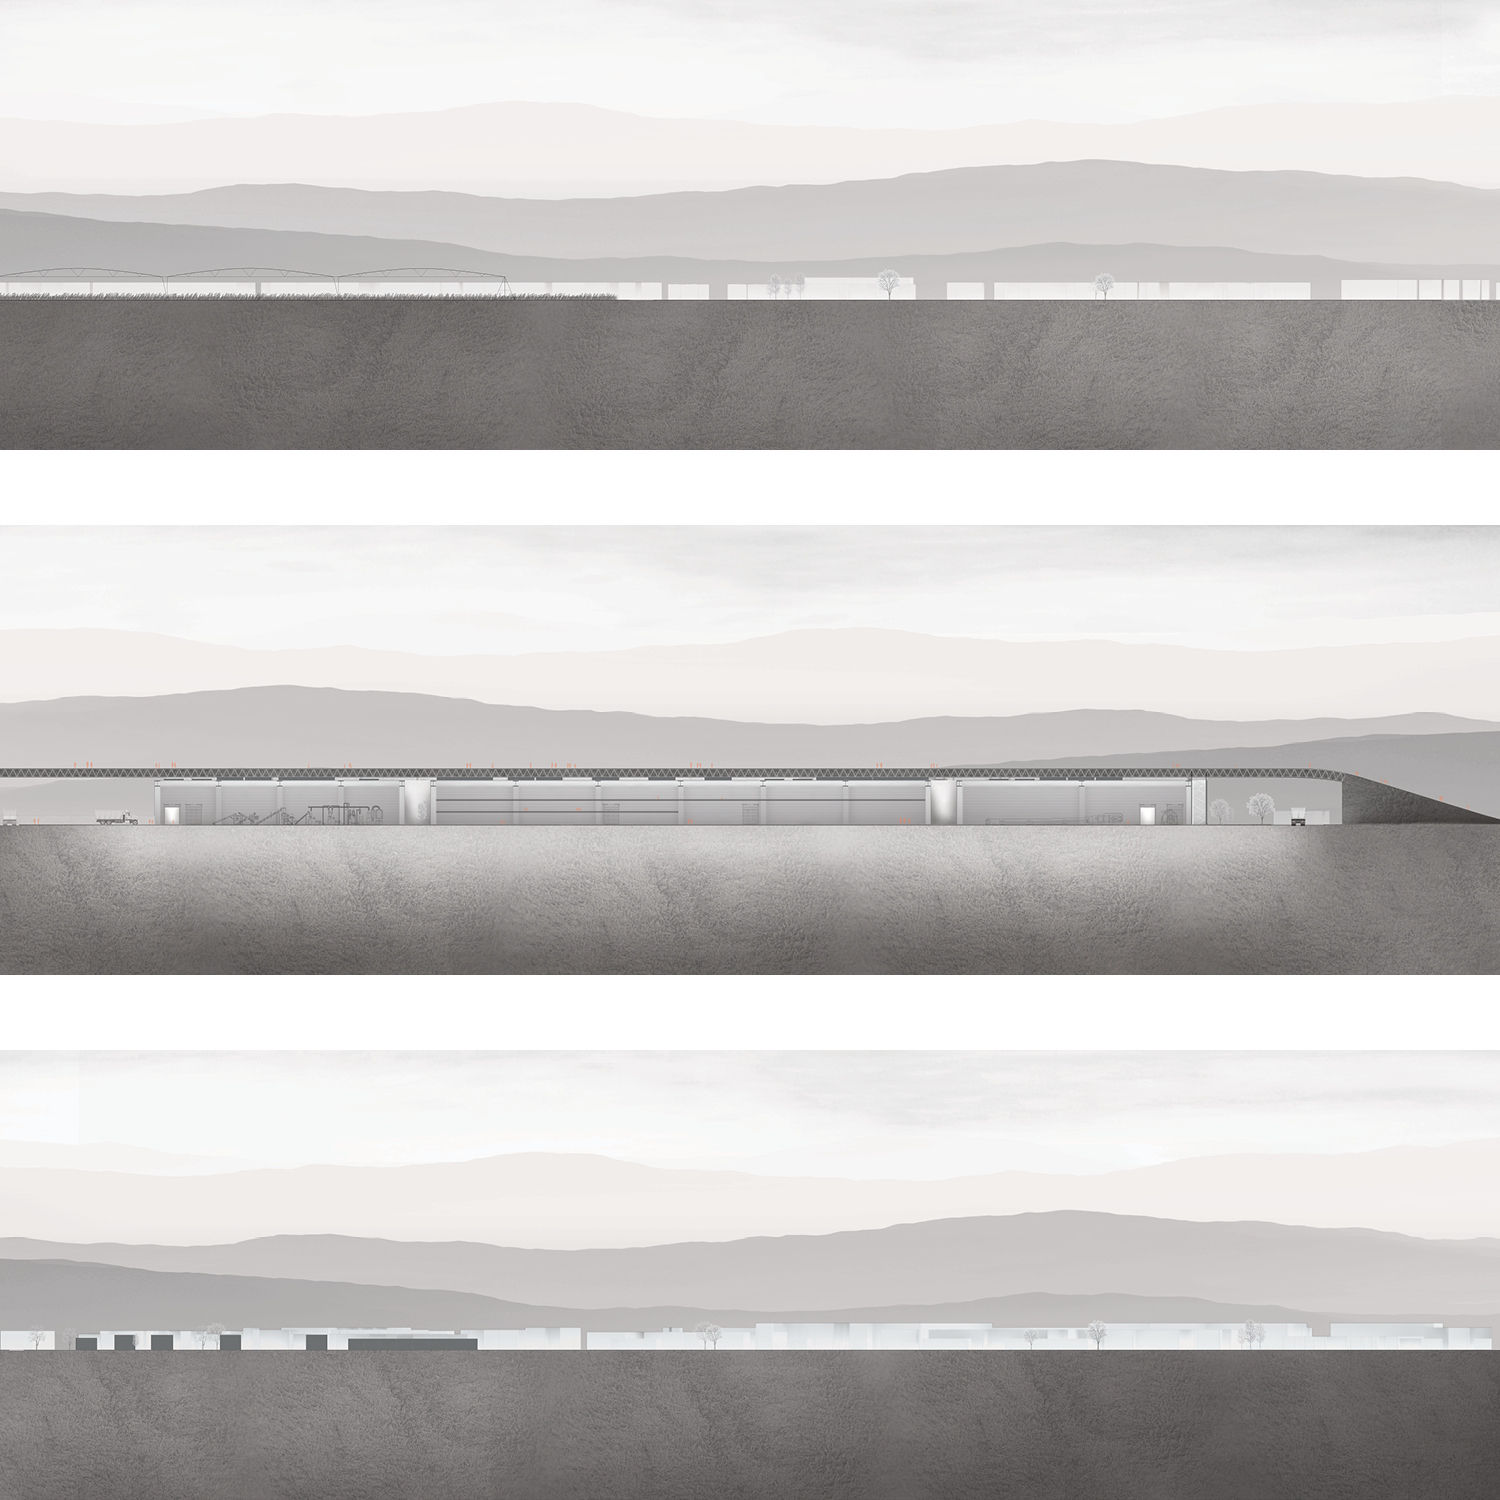 Landscape triptych with three different structure views.